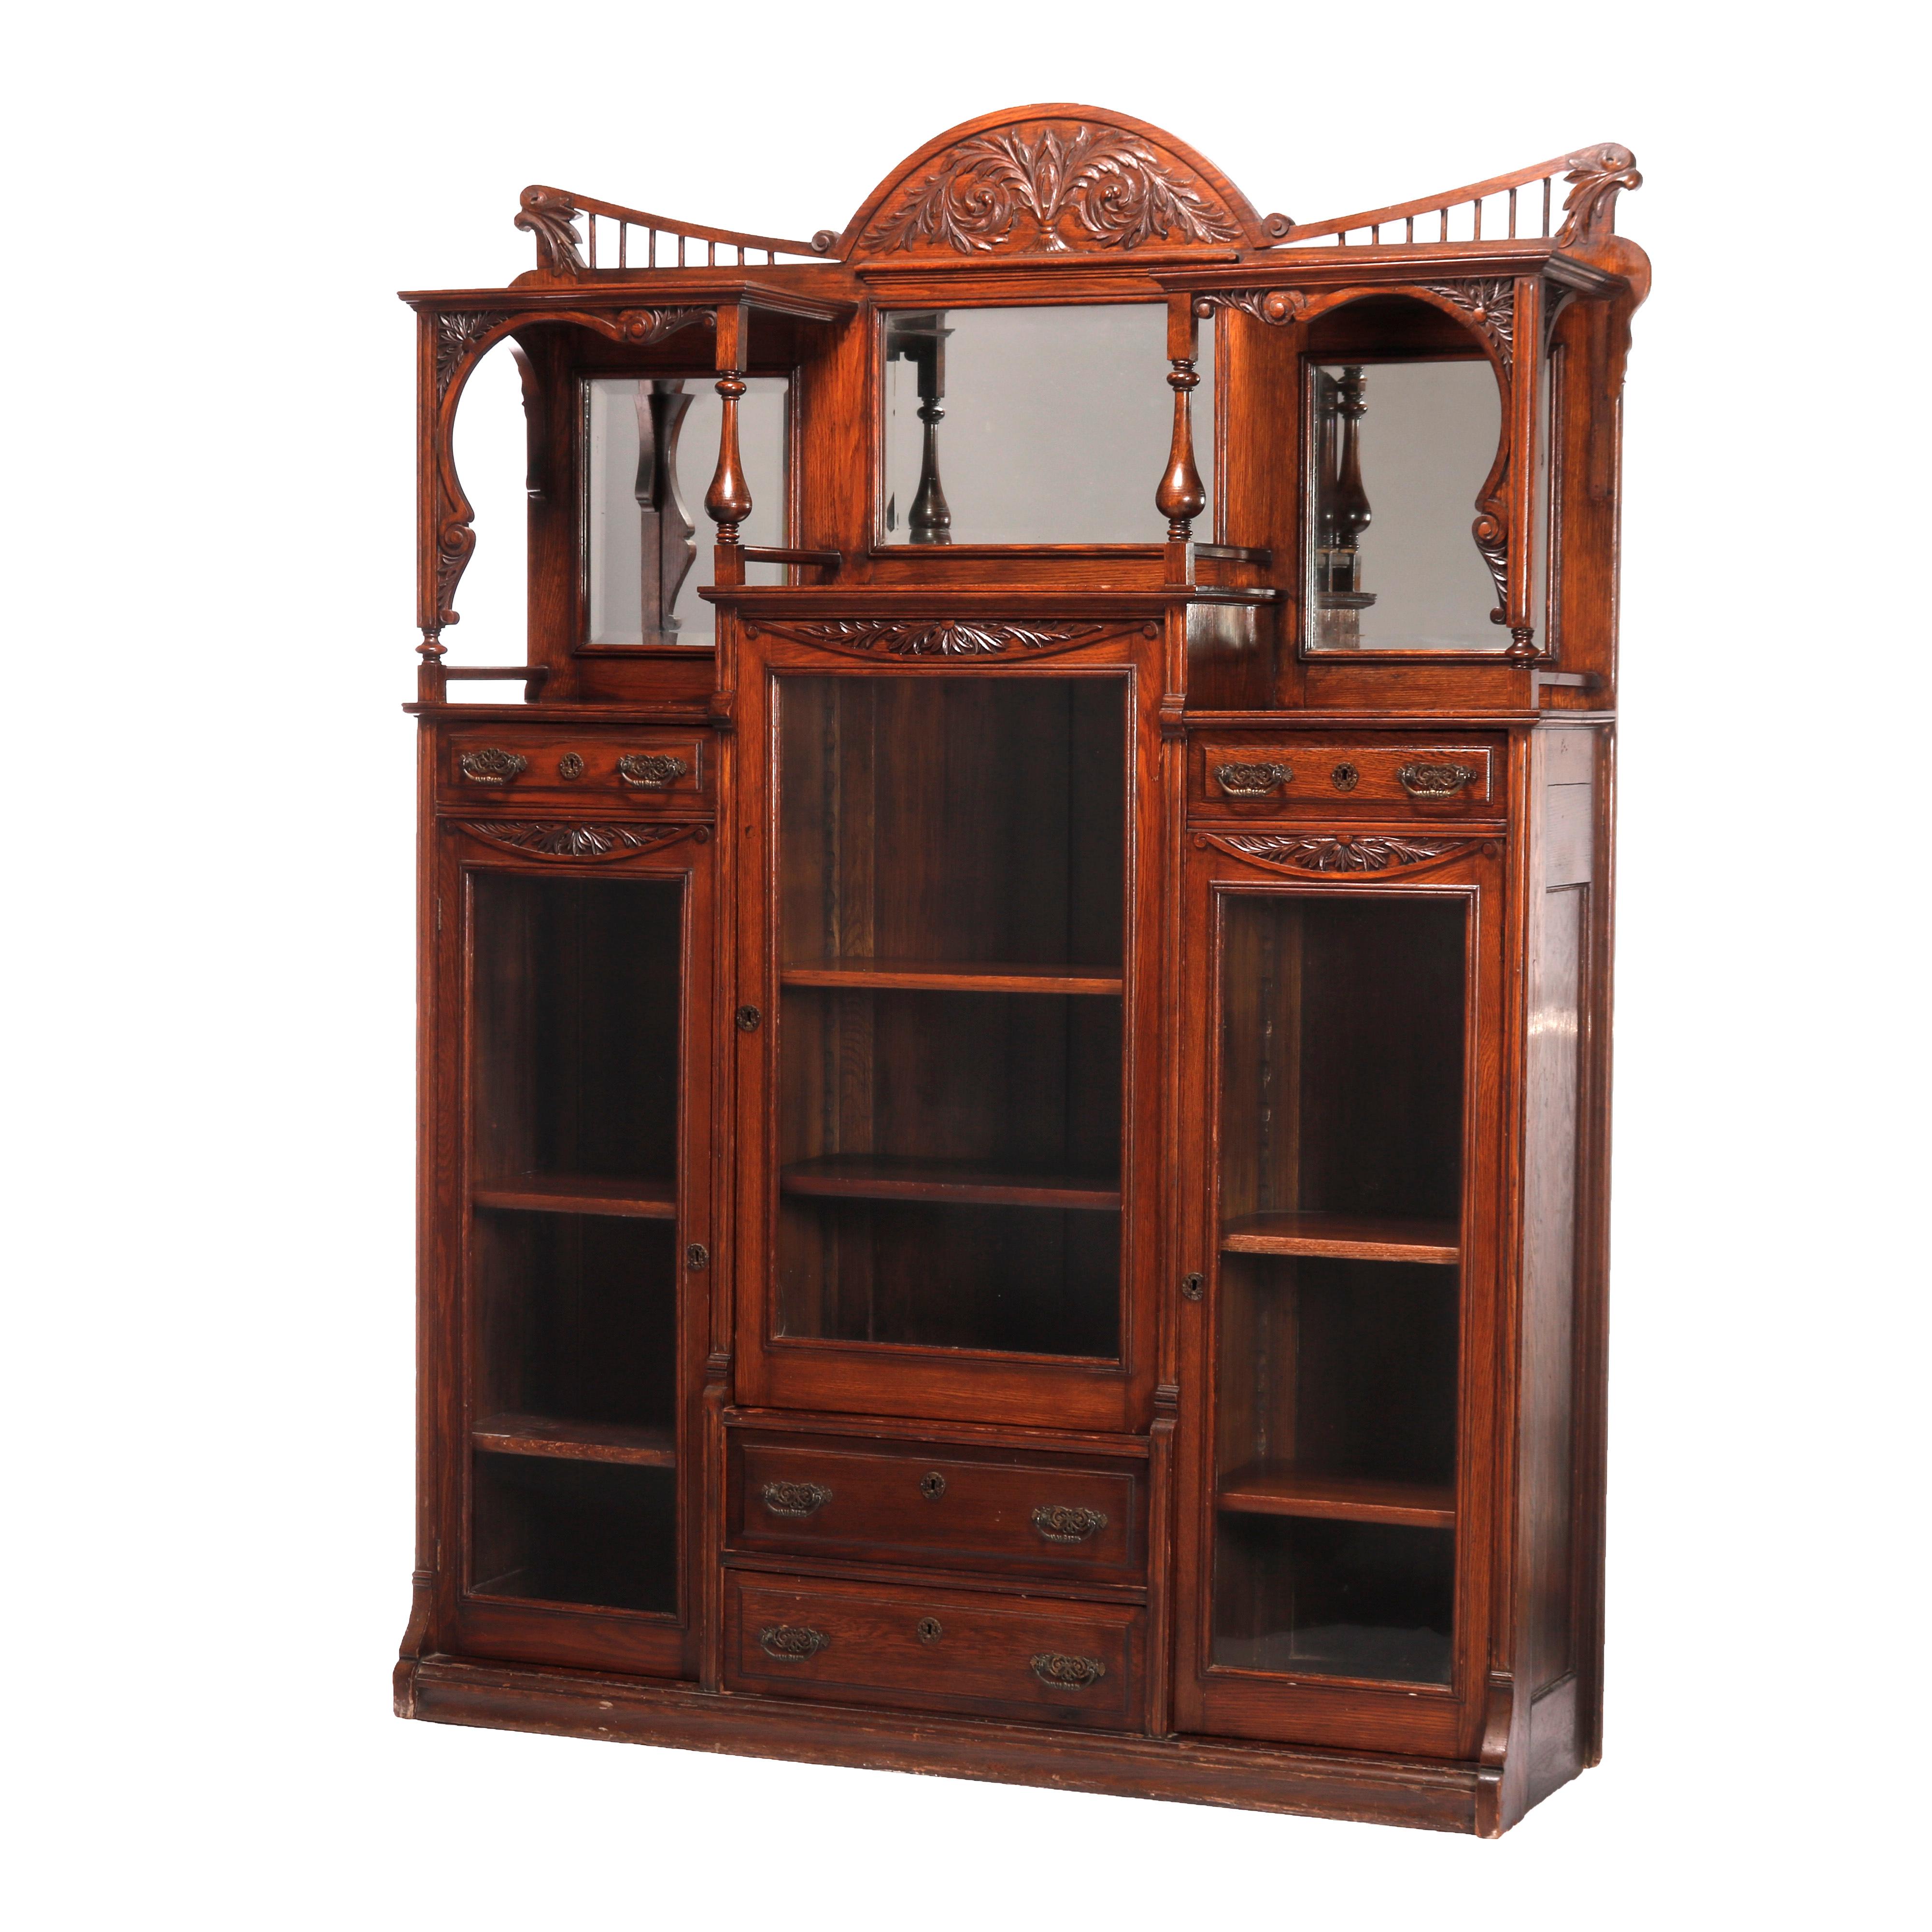 An antique side-by-side bookcase in the manner of RJ Horner offers quarter sawn oak construction with crest having carved palmette floral design and flanking spindle gallery surmounting triple case with mirrored backsplash over towers having drawers